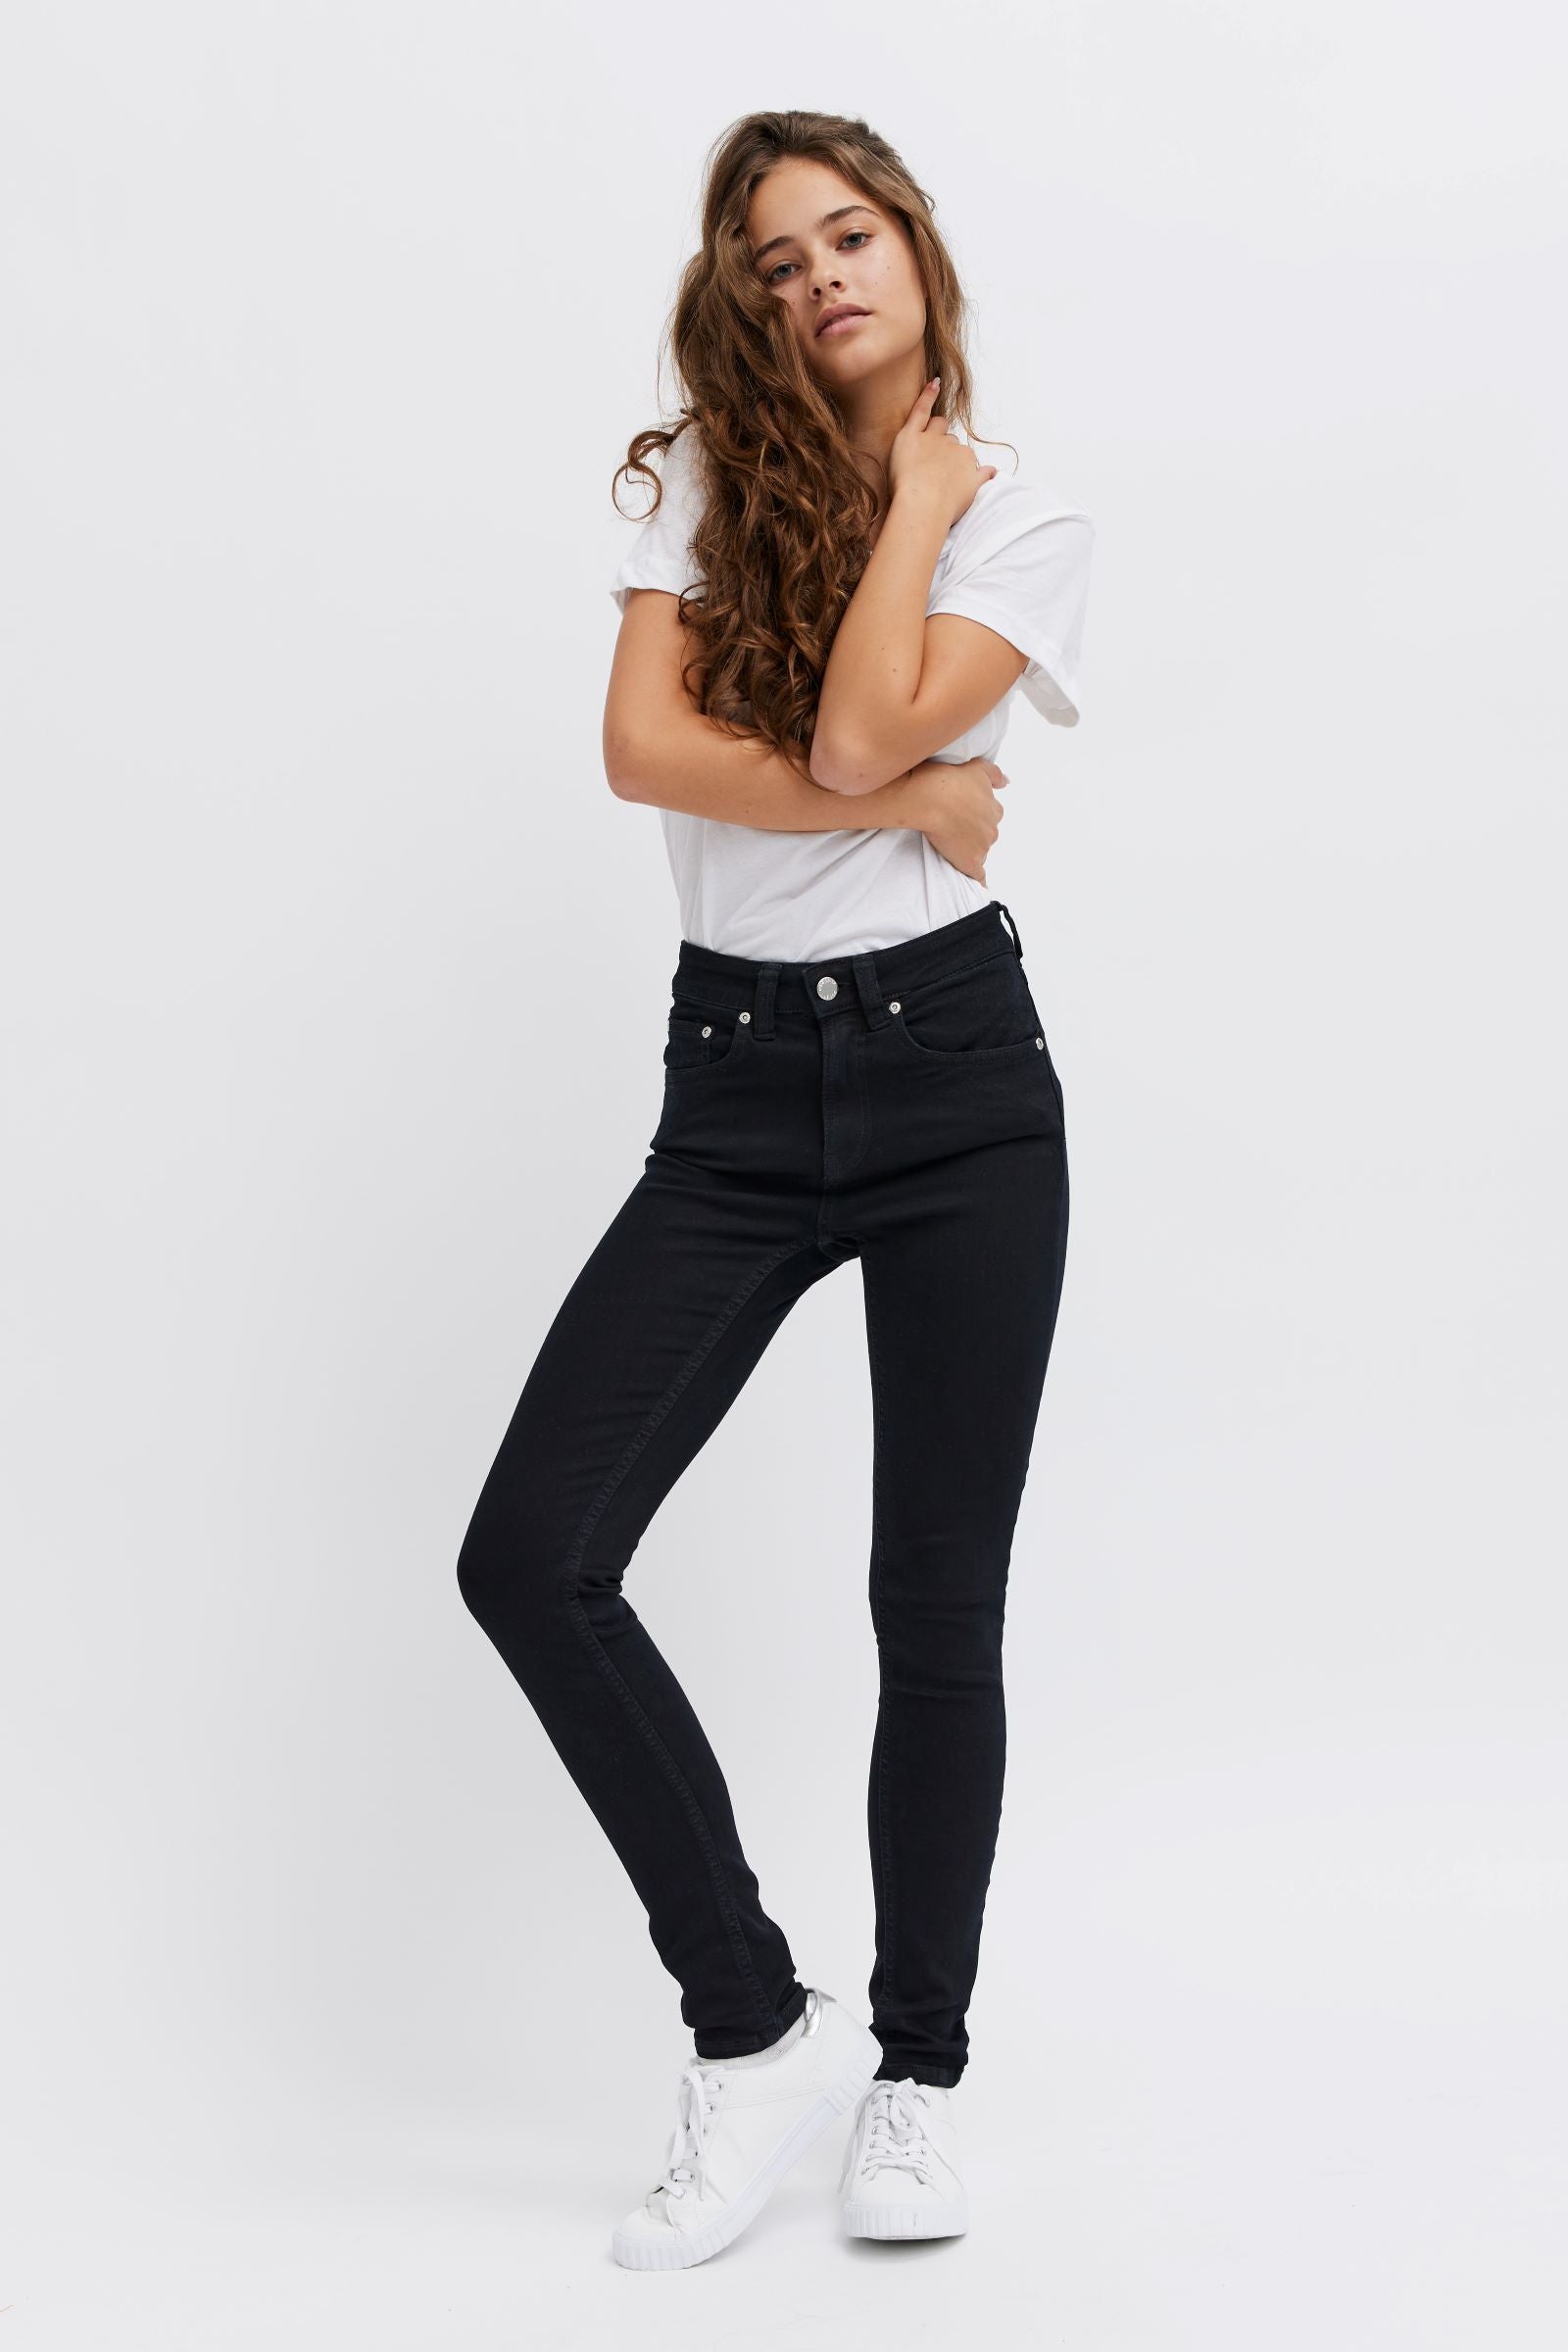 Black stretch jeans - Women's pants - organic, vegan and sustainable